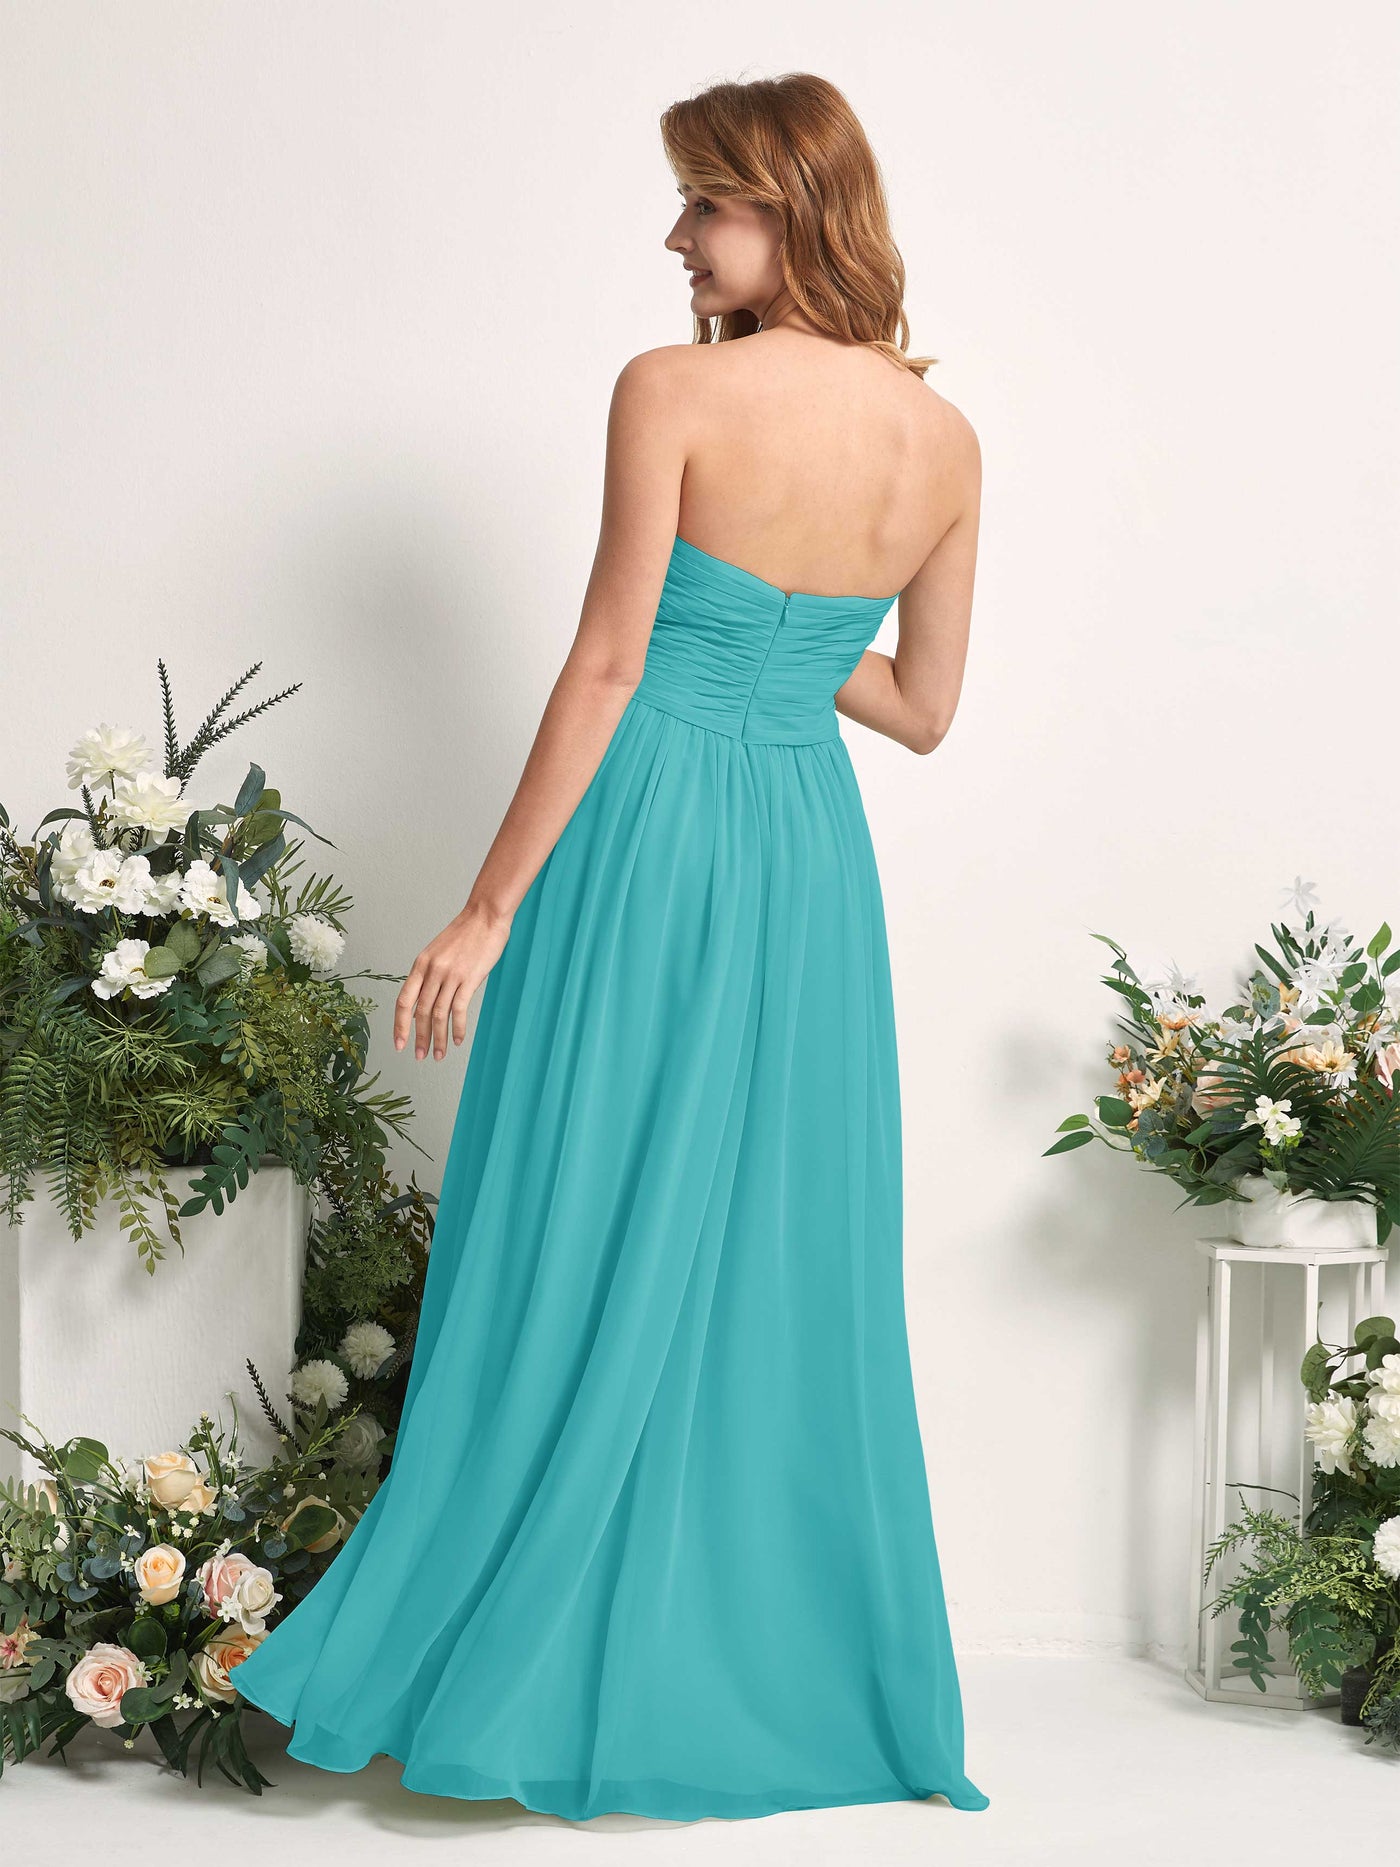 Bridesmaid Dress A-line Chiffon Sweetheart Full Length Sleeveless Wedding Party Dress - Turquoise (81226923)#color_turquoise